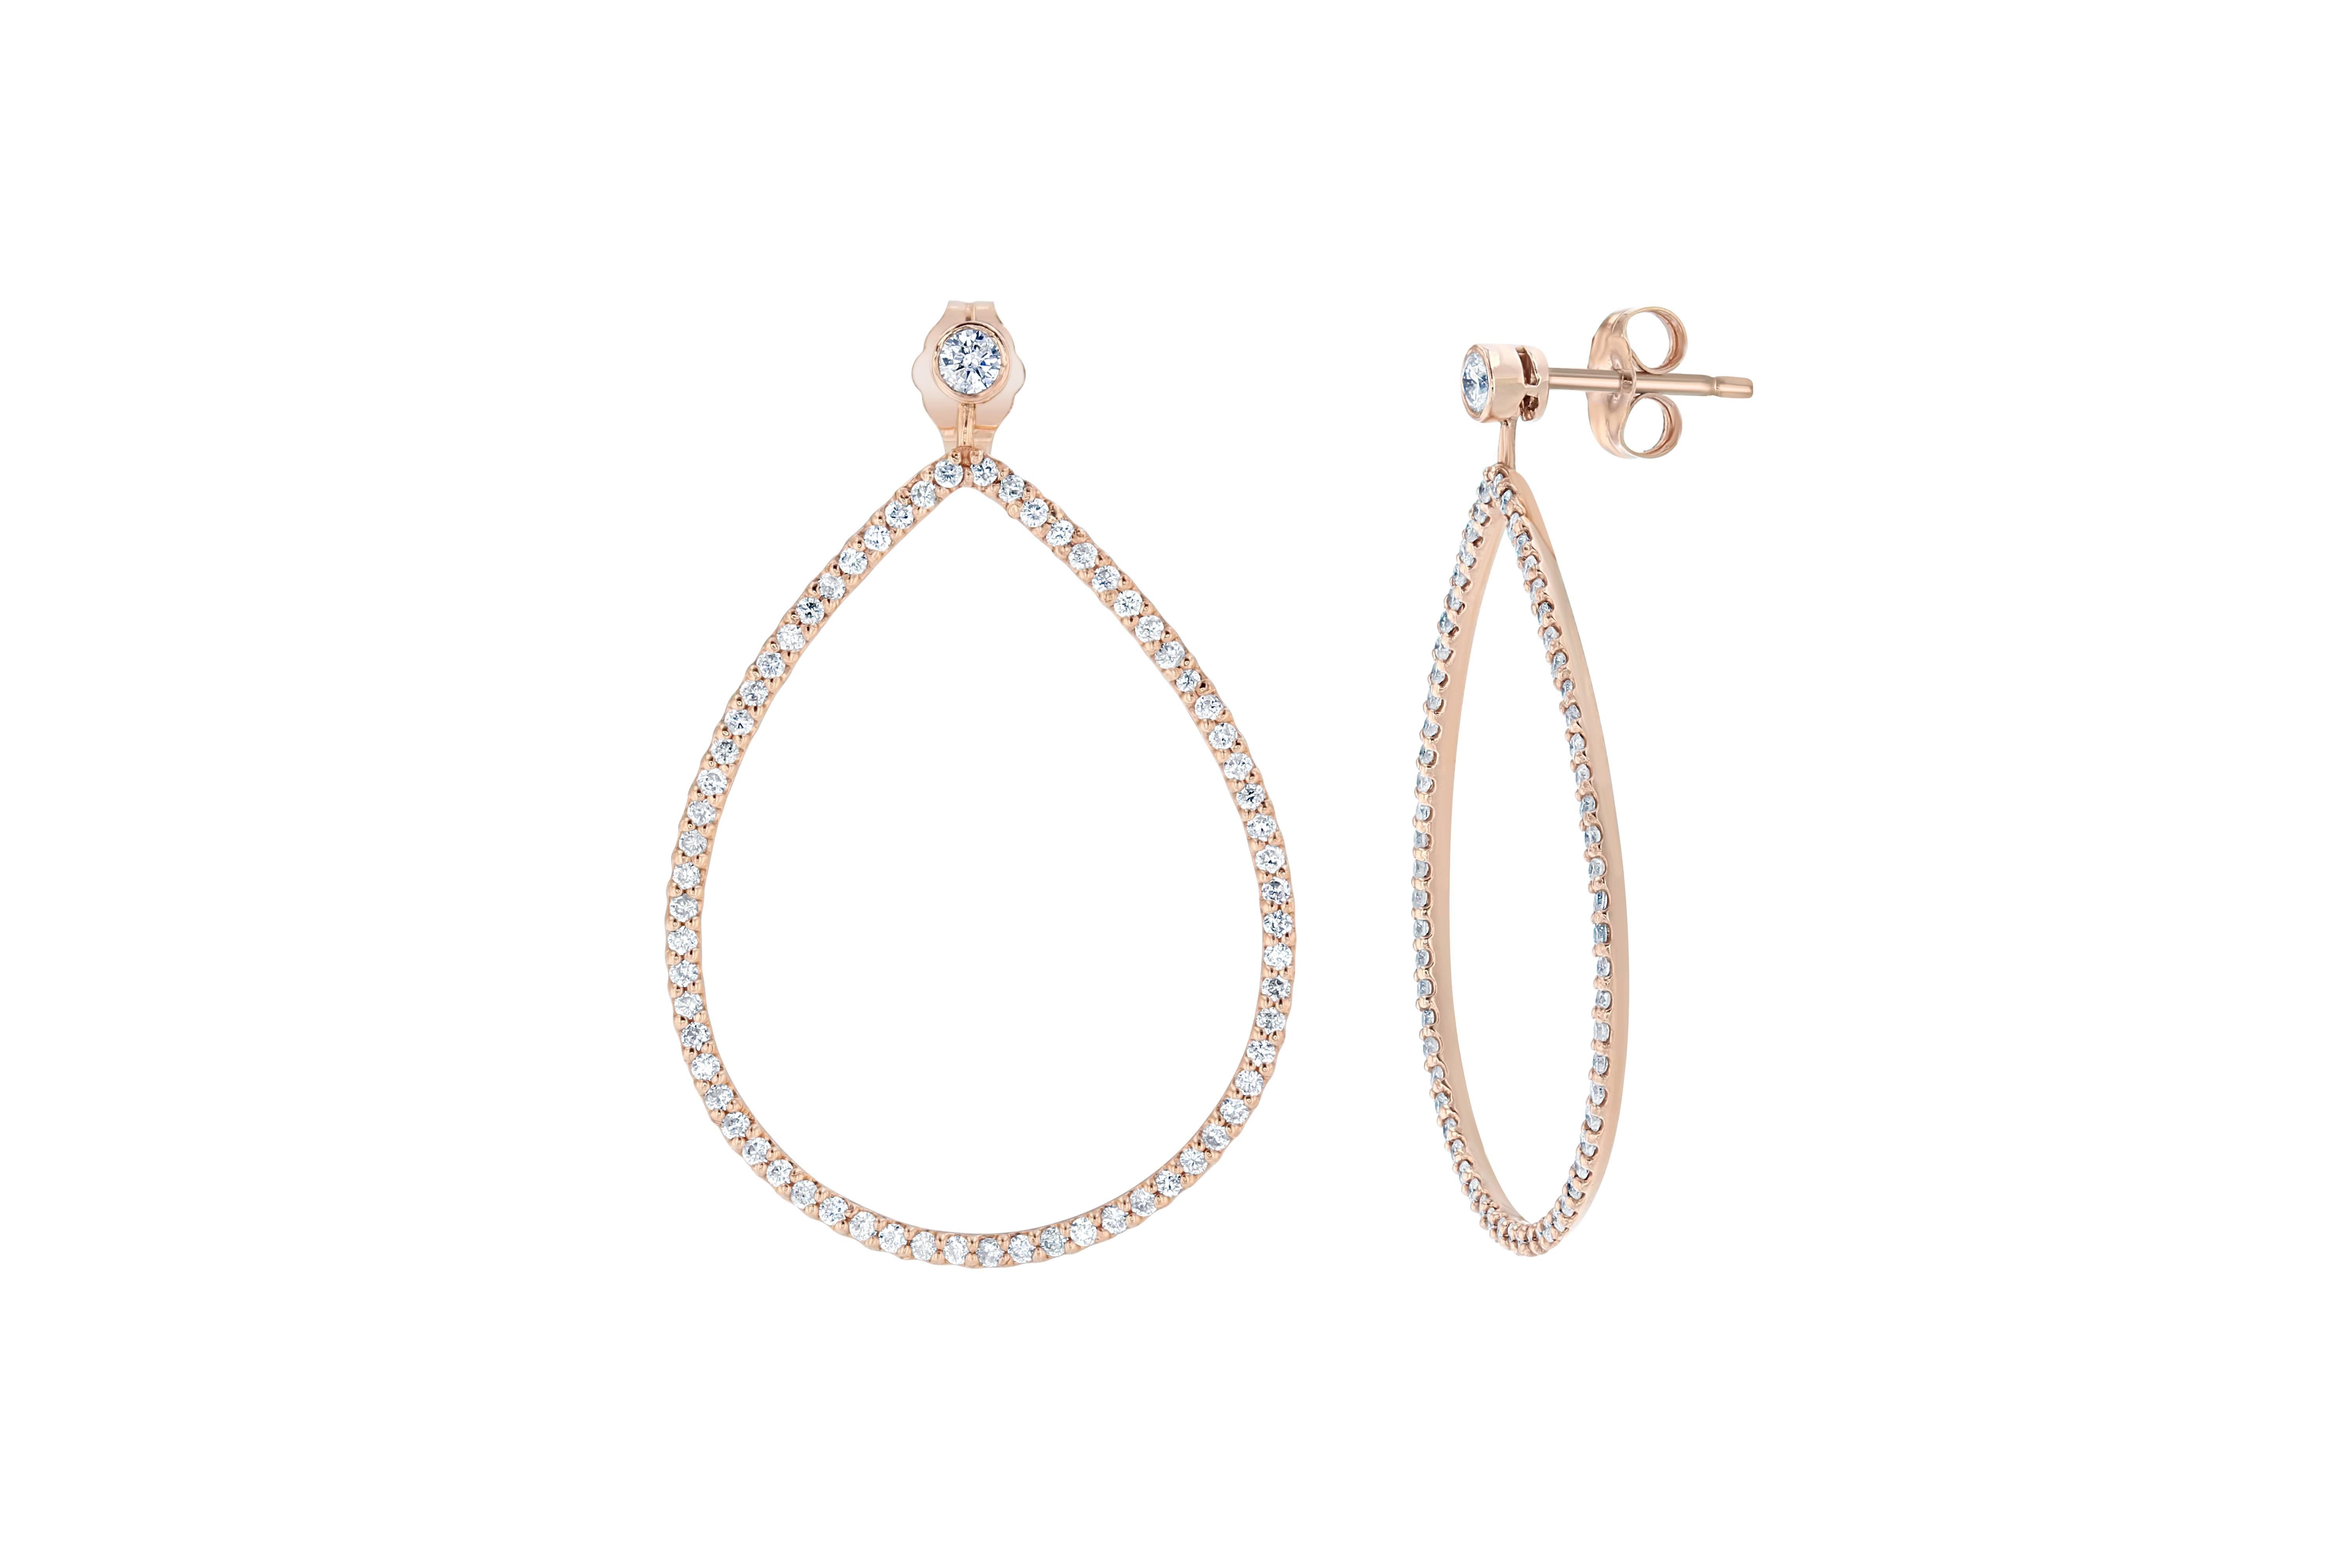 These simple and elegant earrings are sure to enhance everyone's jewelry collection!  These earrings have 132 Round Cut Diamonds that weigh 1.03 carats and are made in 14K Rose Gold and weigh approximately 4.0 grams.  The length  is 1.50 inches.